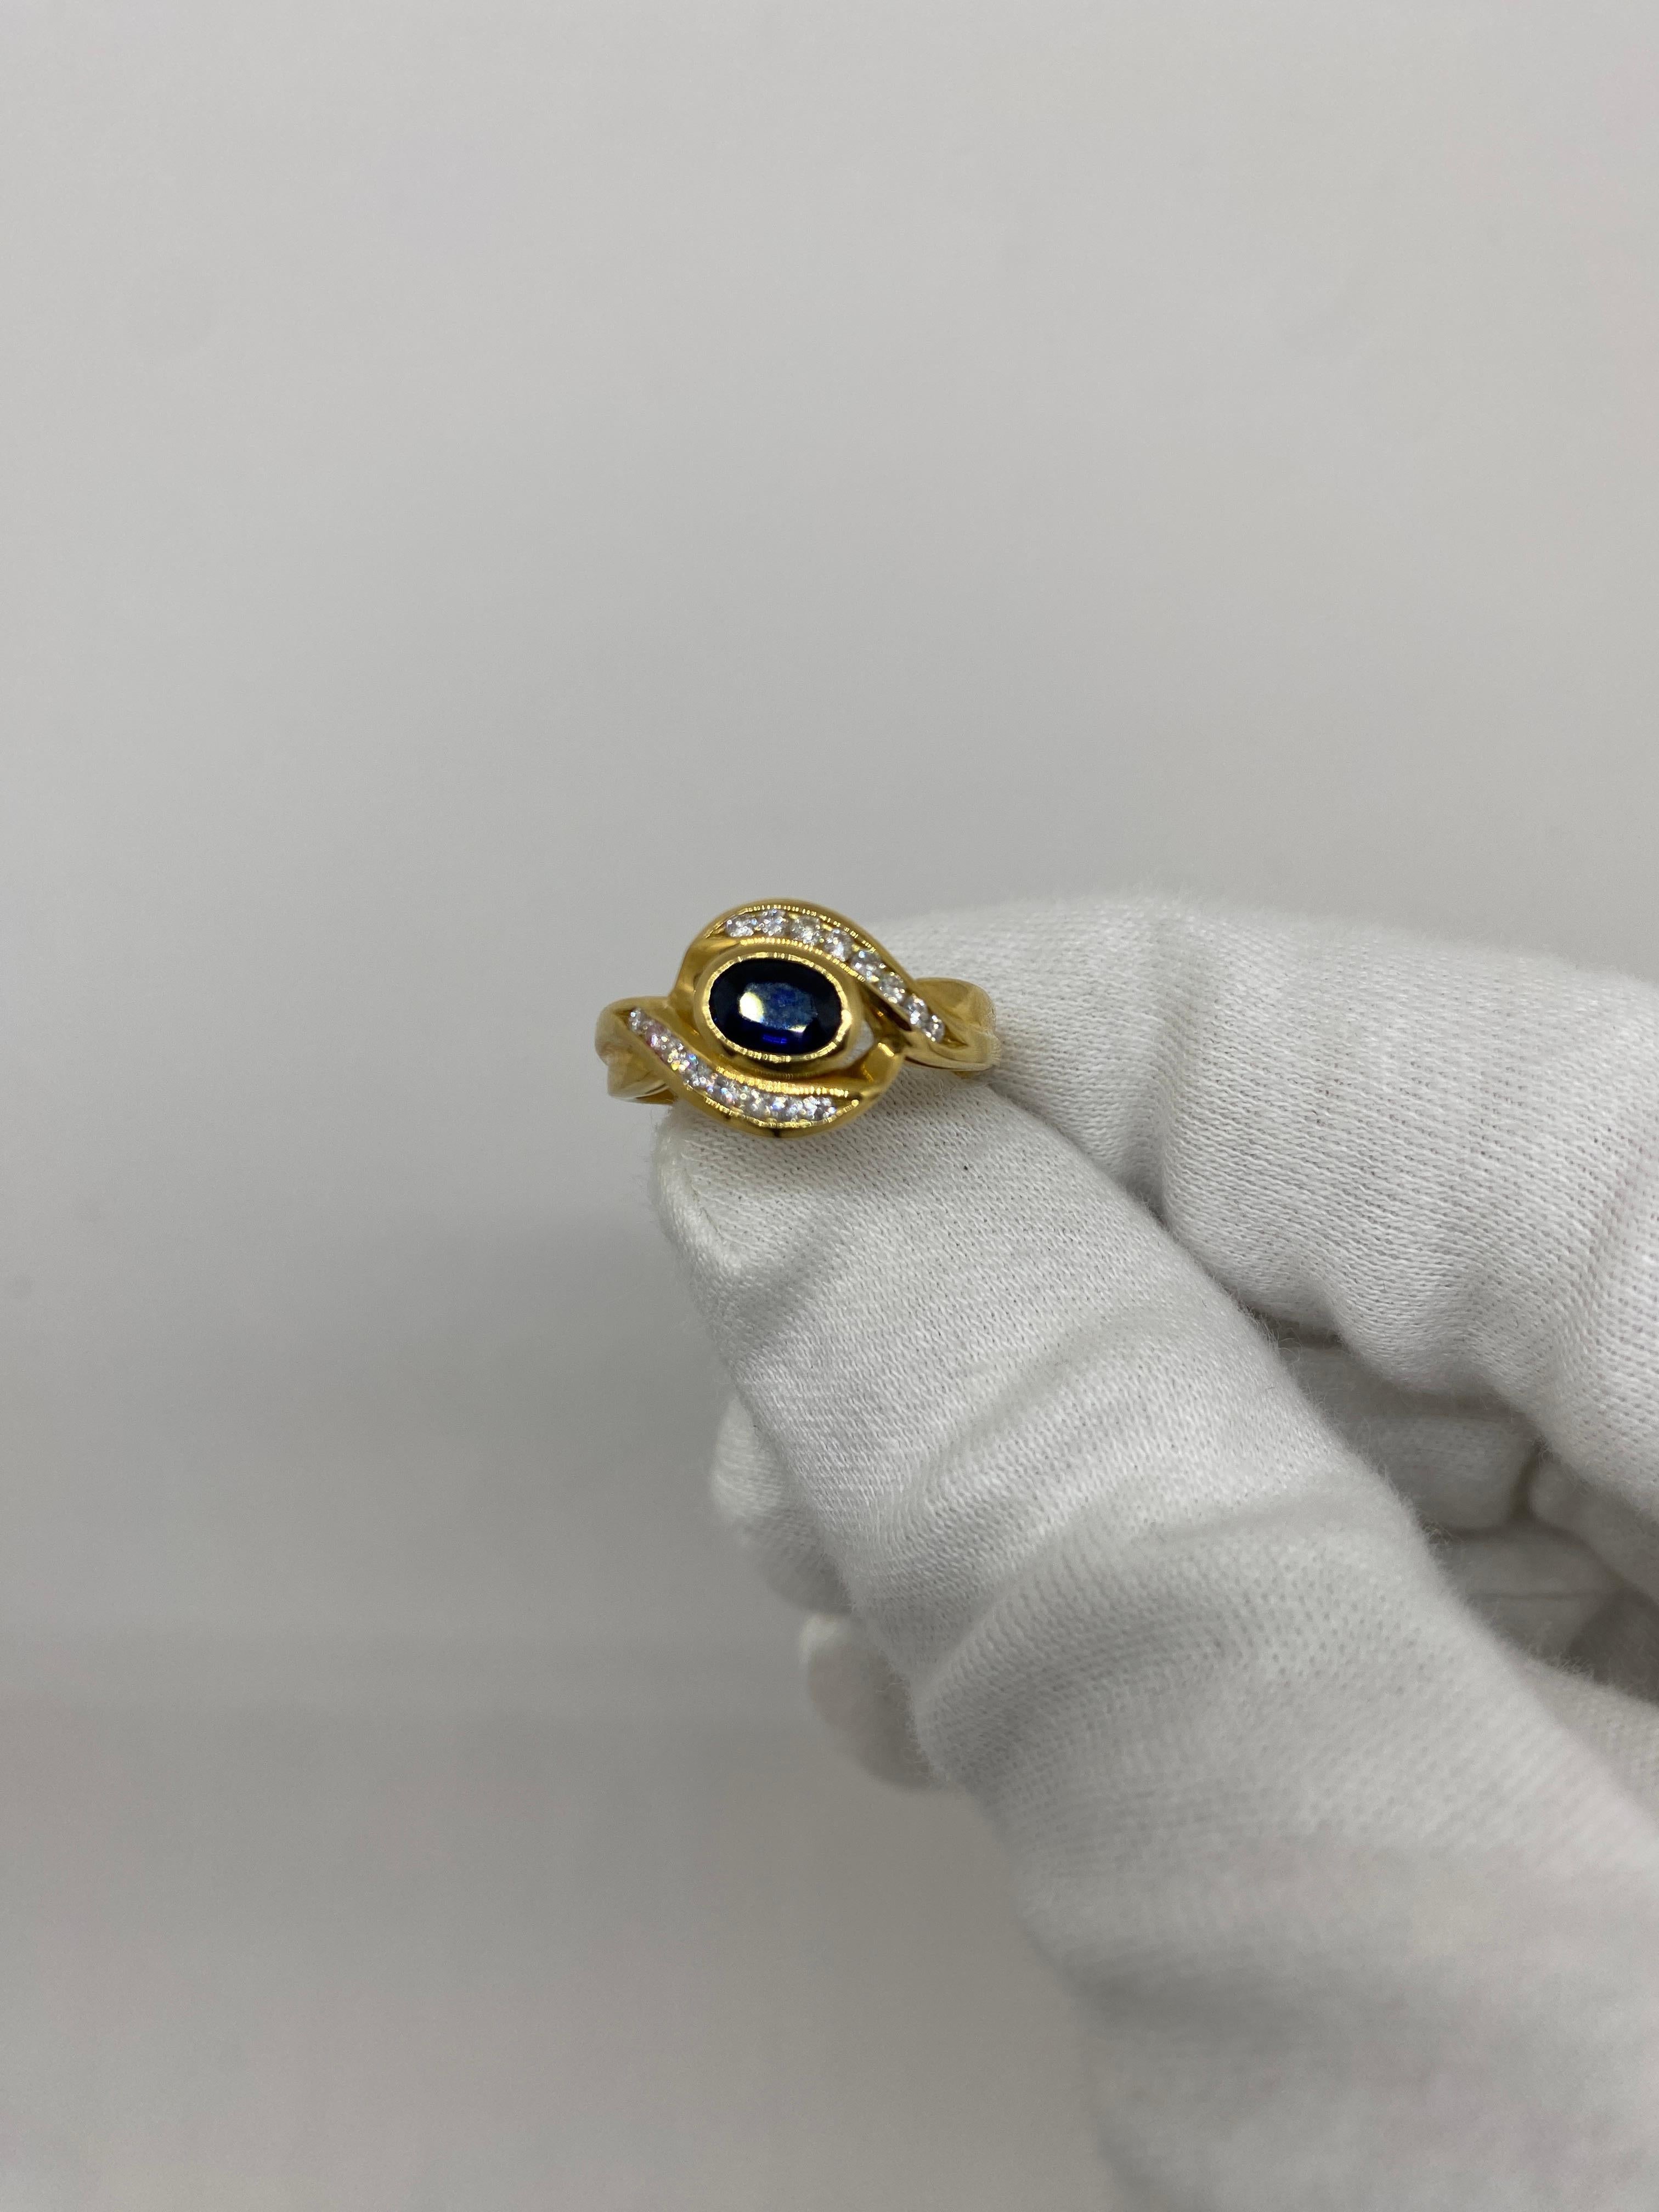 Ring made of 18kt yellow gold with oval blue sapphire for ct.1.01 and natural white brilliant-cut diamonds for ct.0.29

Welcome to our jewelry collection, where every piece tells a story of timeless elegance and unparalleled craftsmanship. As a